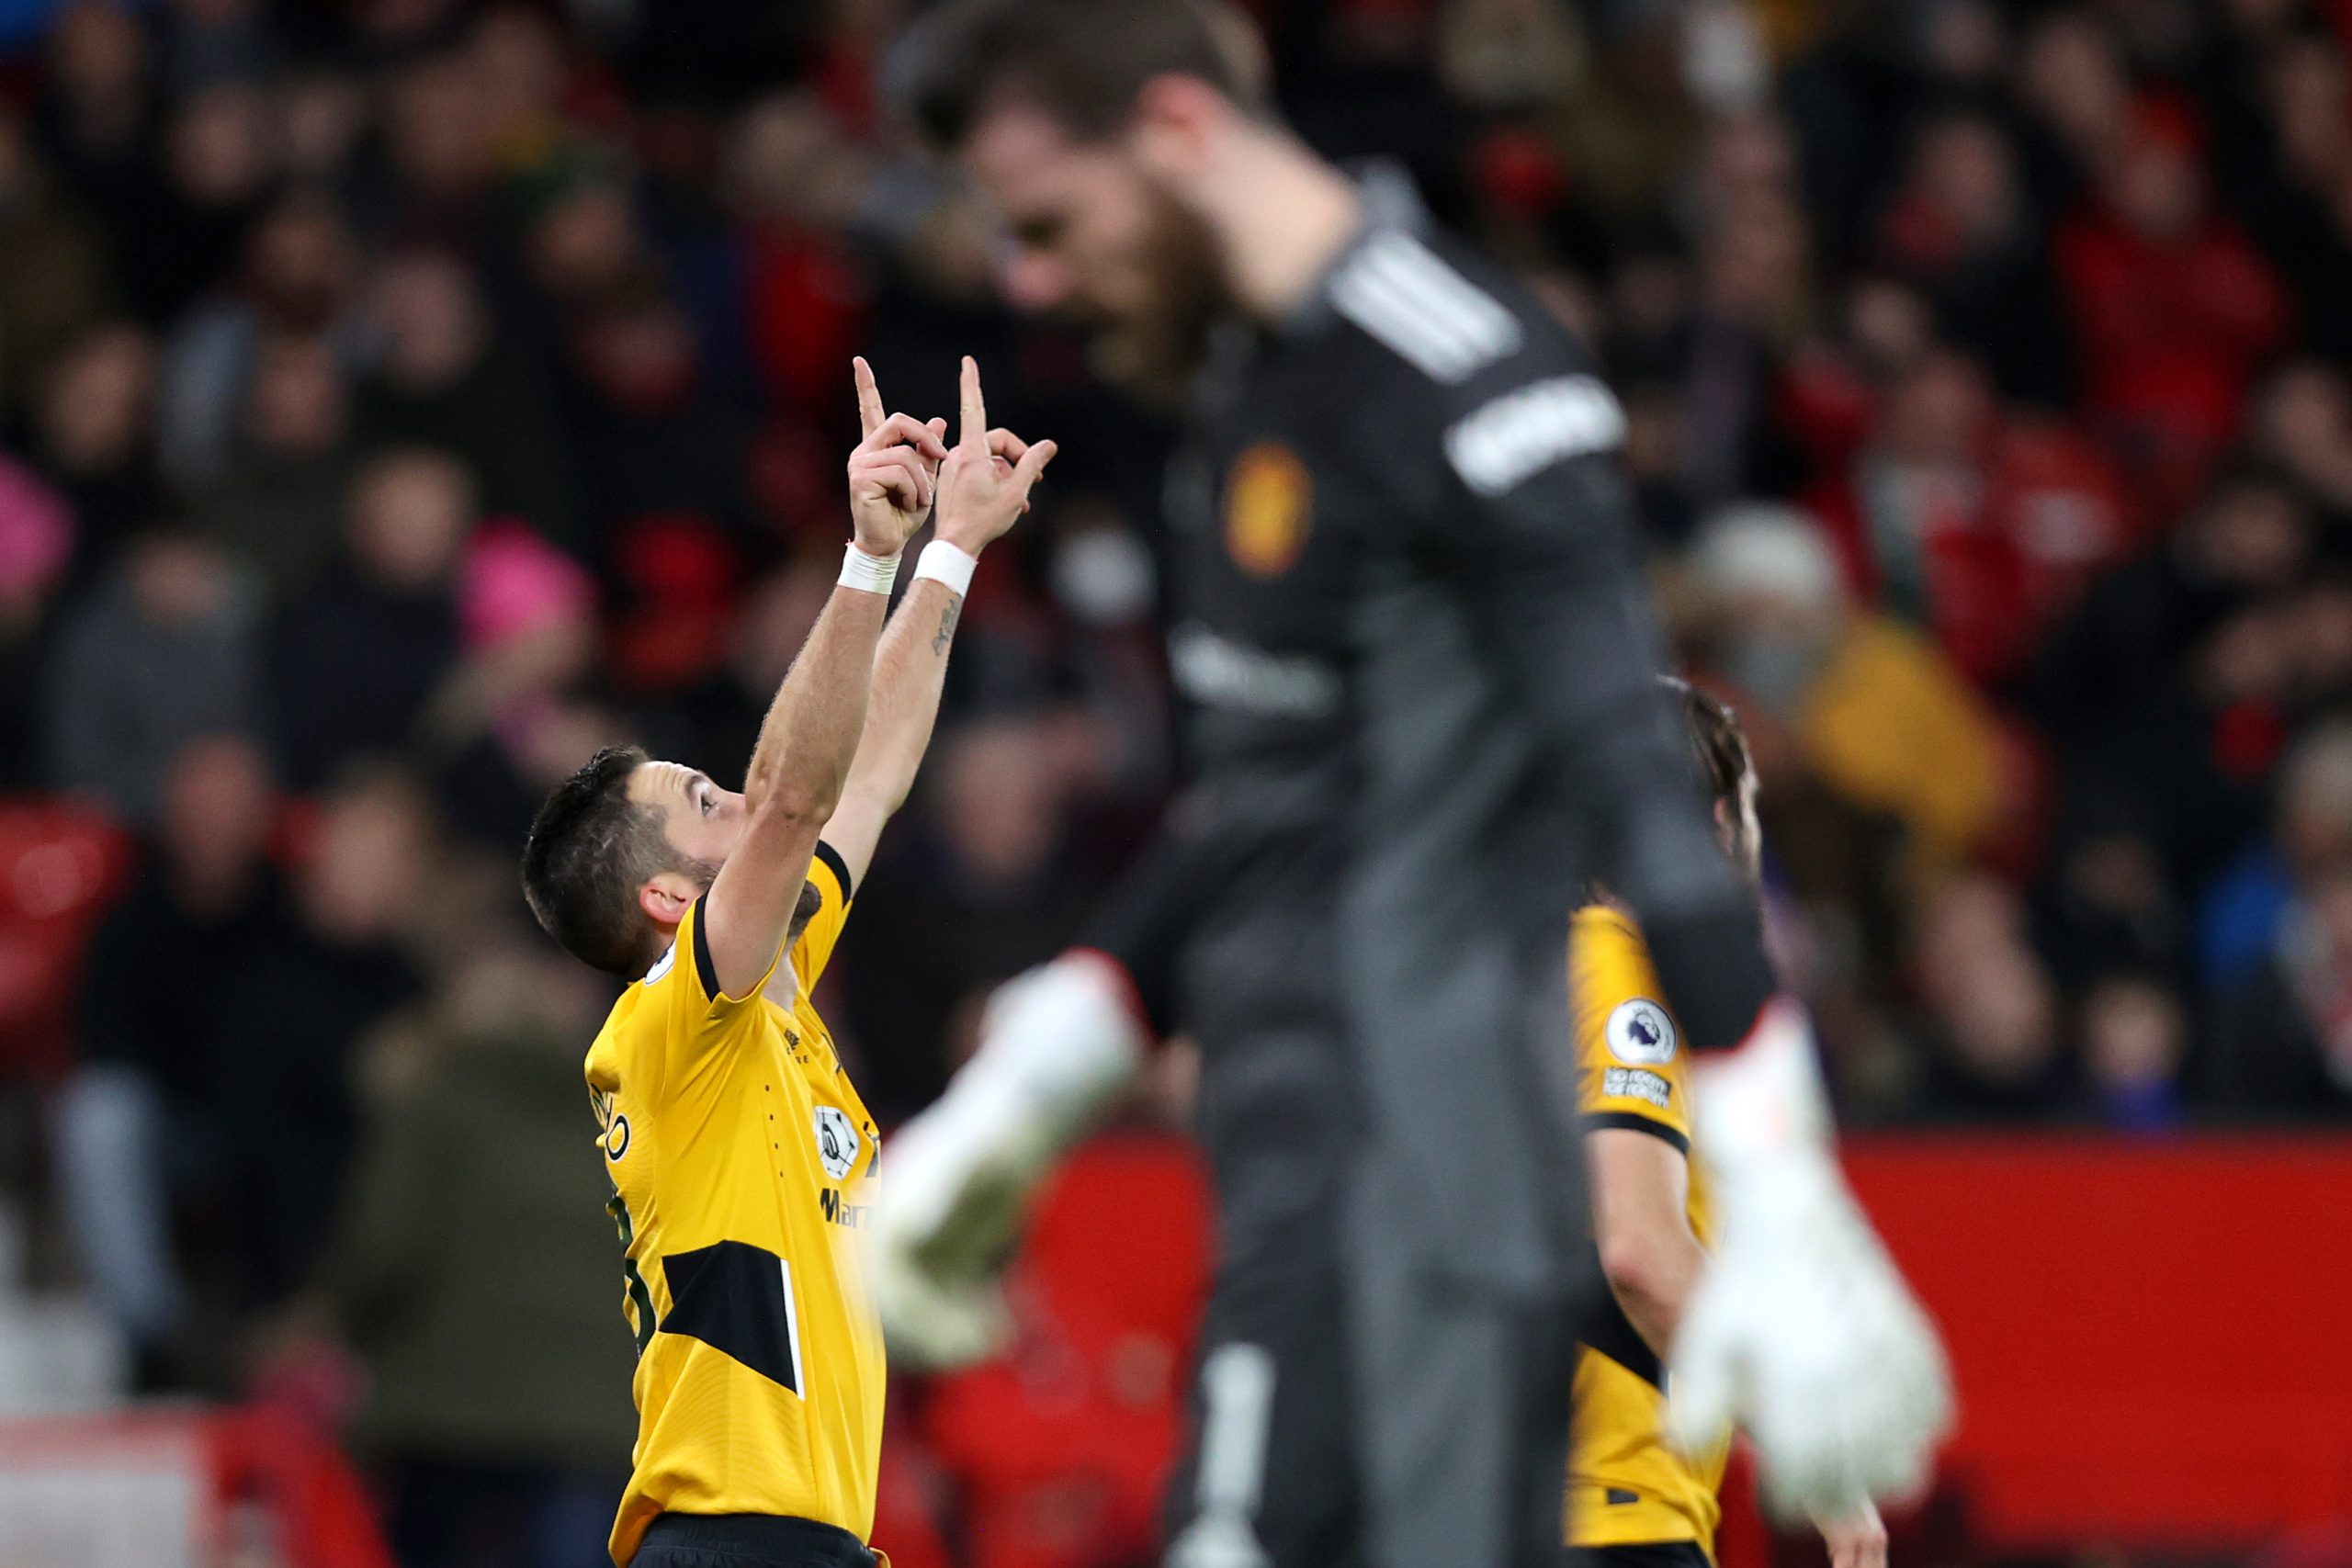 Manchester United lost to Wolves at Old Trafford for the first time since 1980.